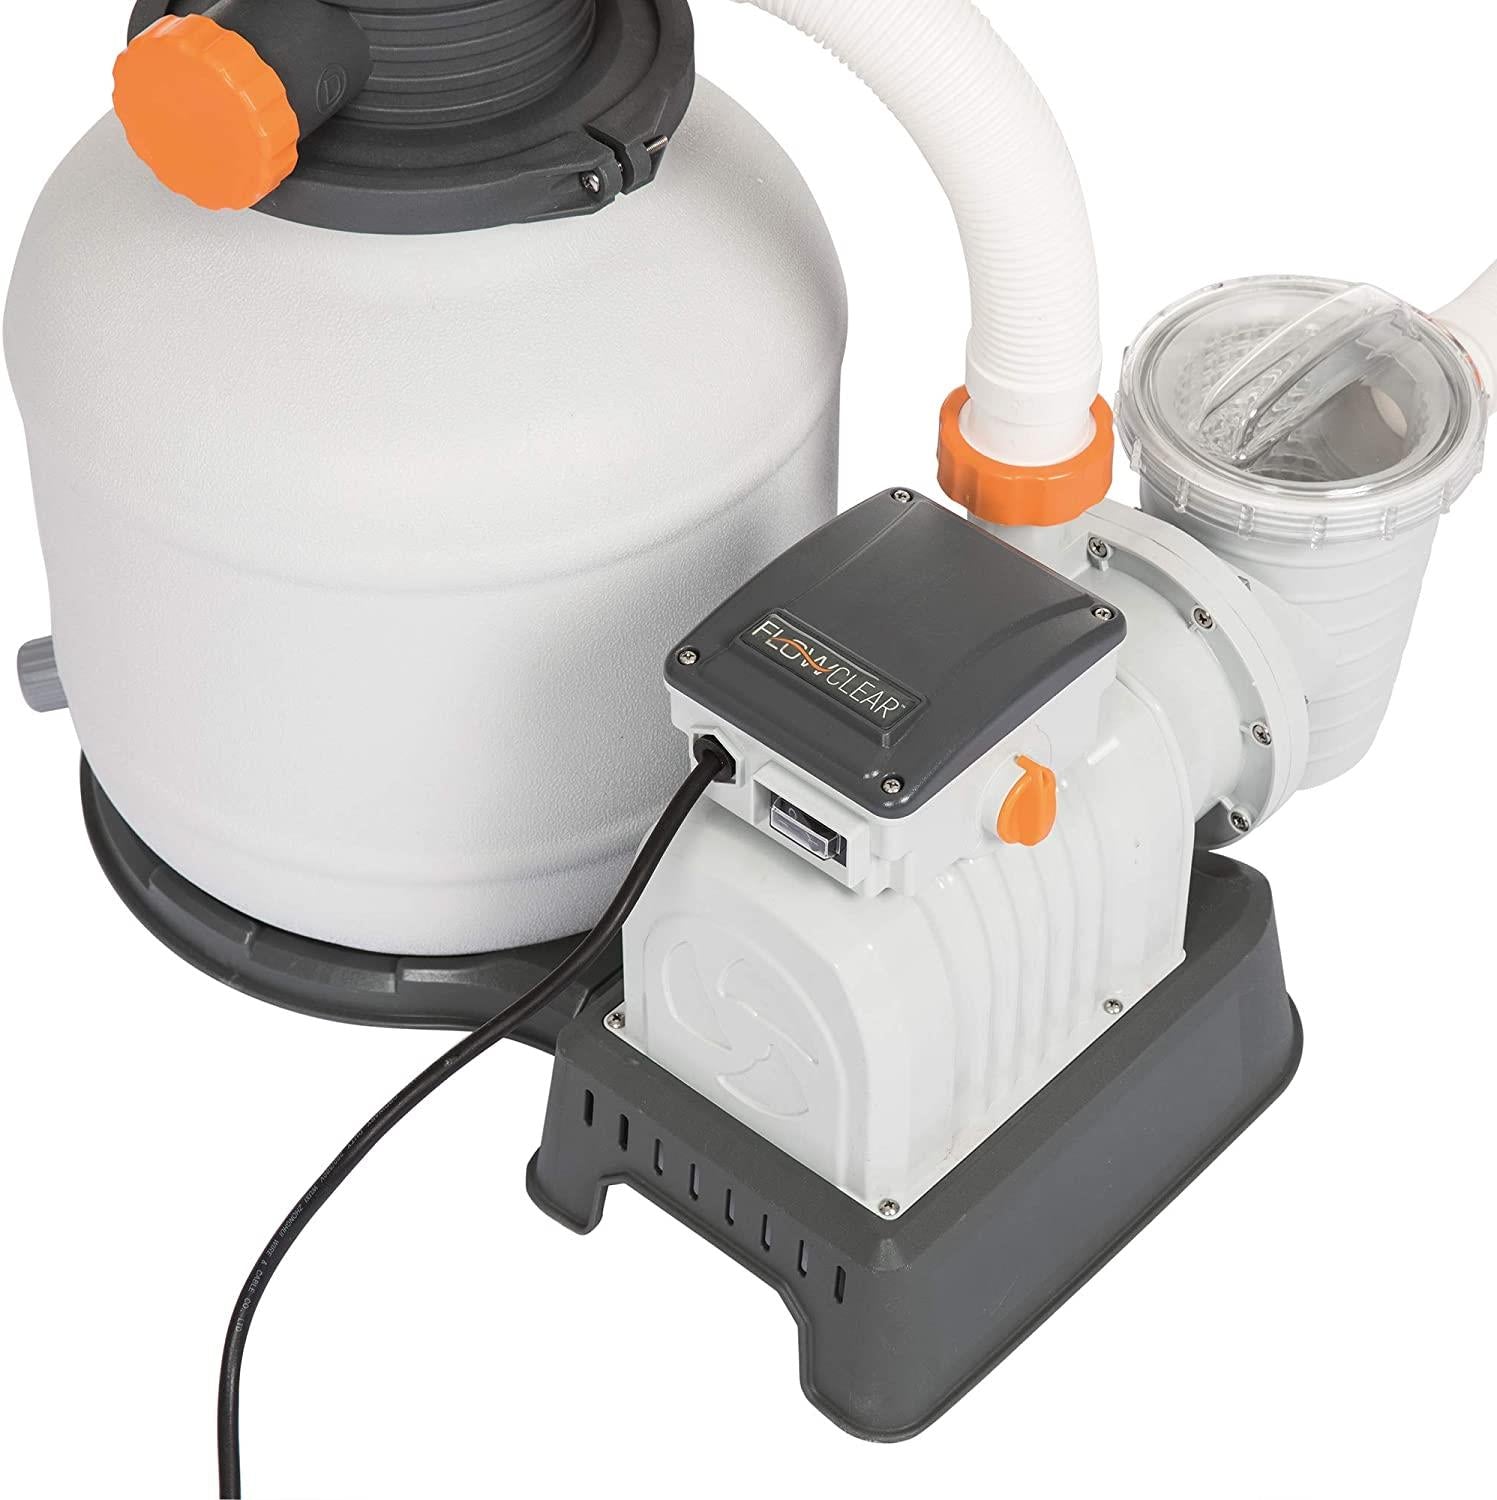 Bestway Flowclear 2000Gal Sand Filter System by Geezy - The Magic Toy Shop